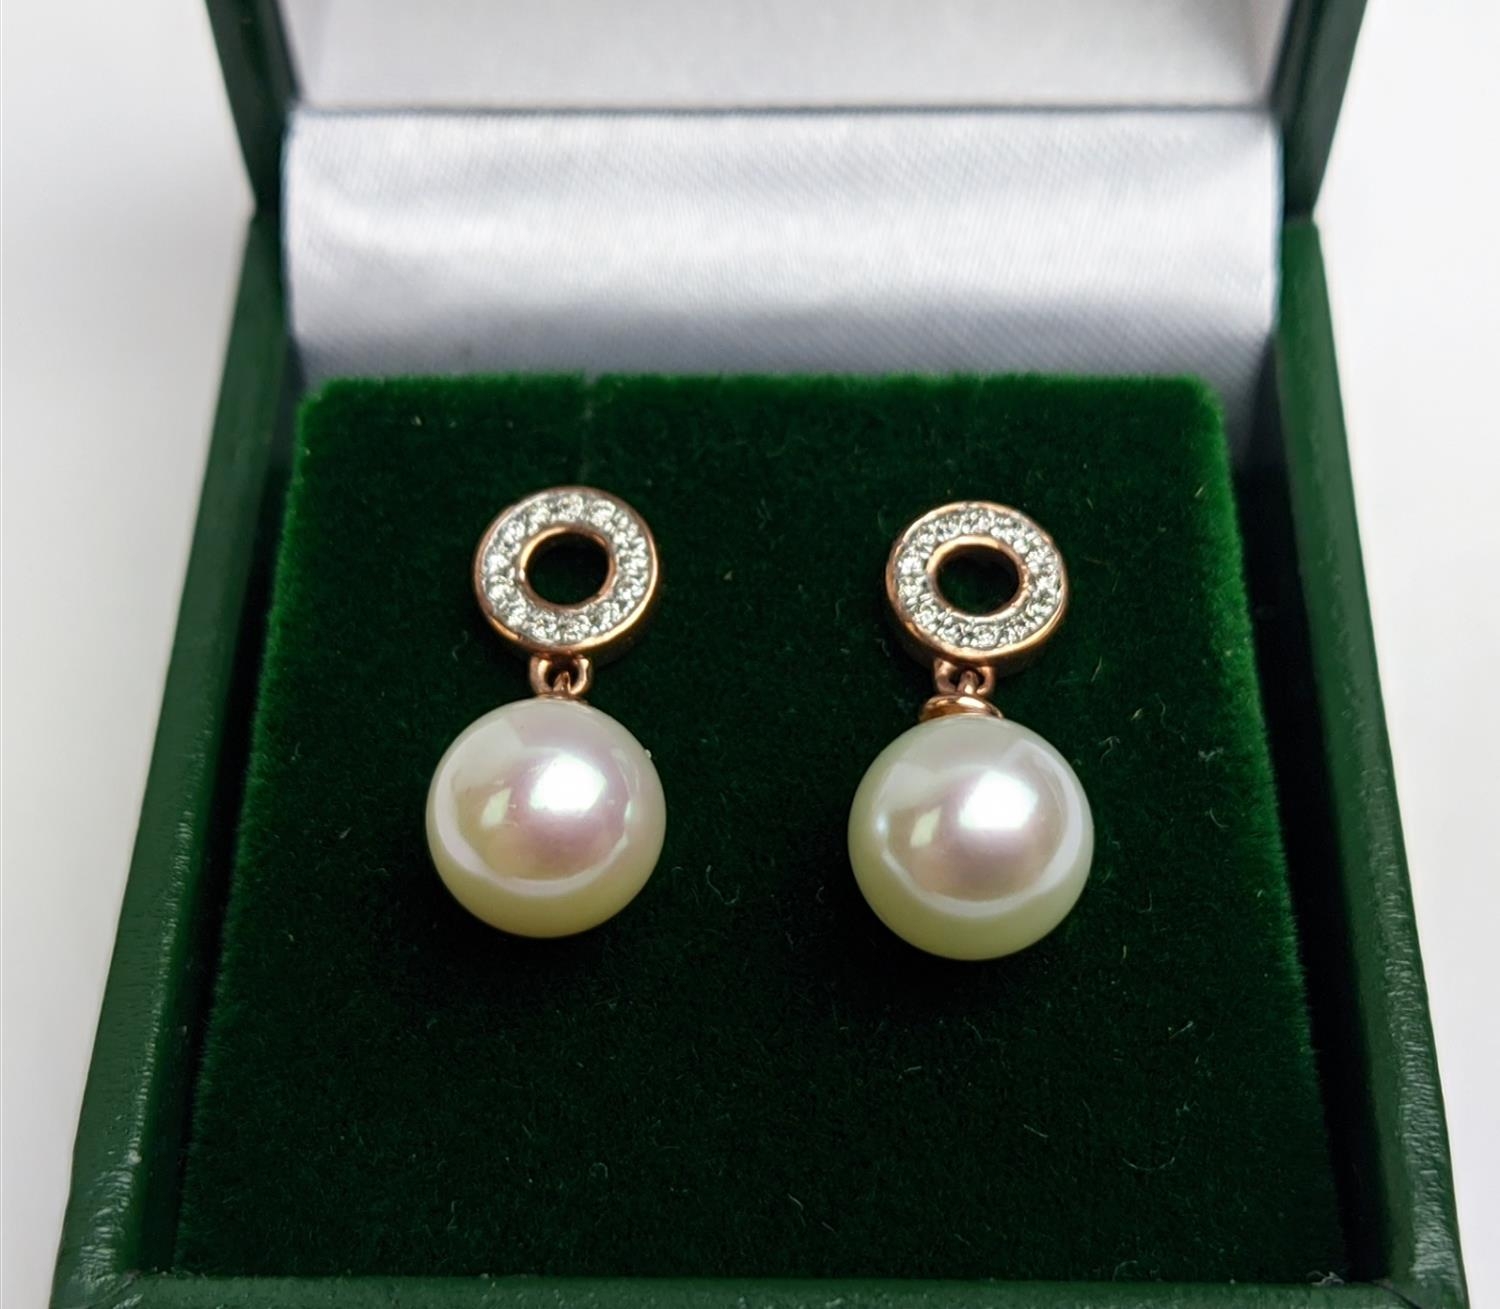 A PAIR OF 9CT GOLD CULTURED PEARL AND DIAMOND DROP EARRINGS, the pearls of 8mm diameter, complete